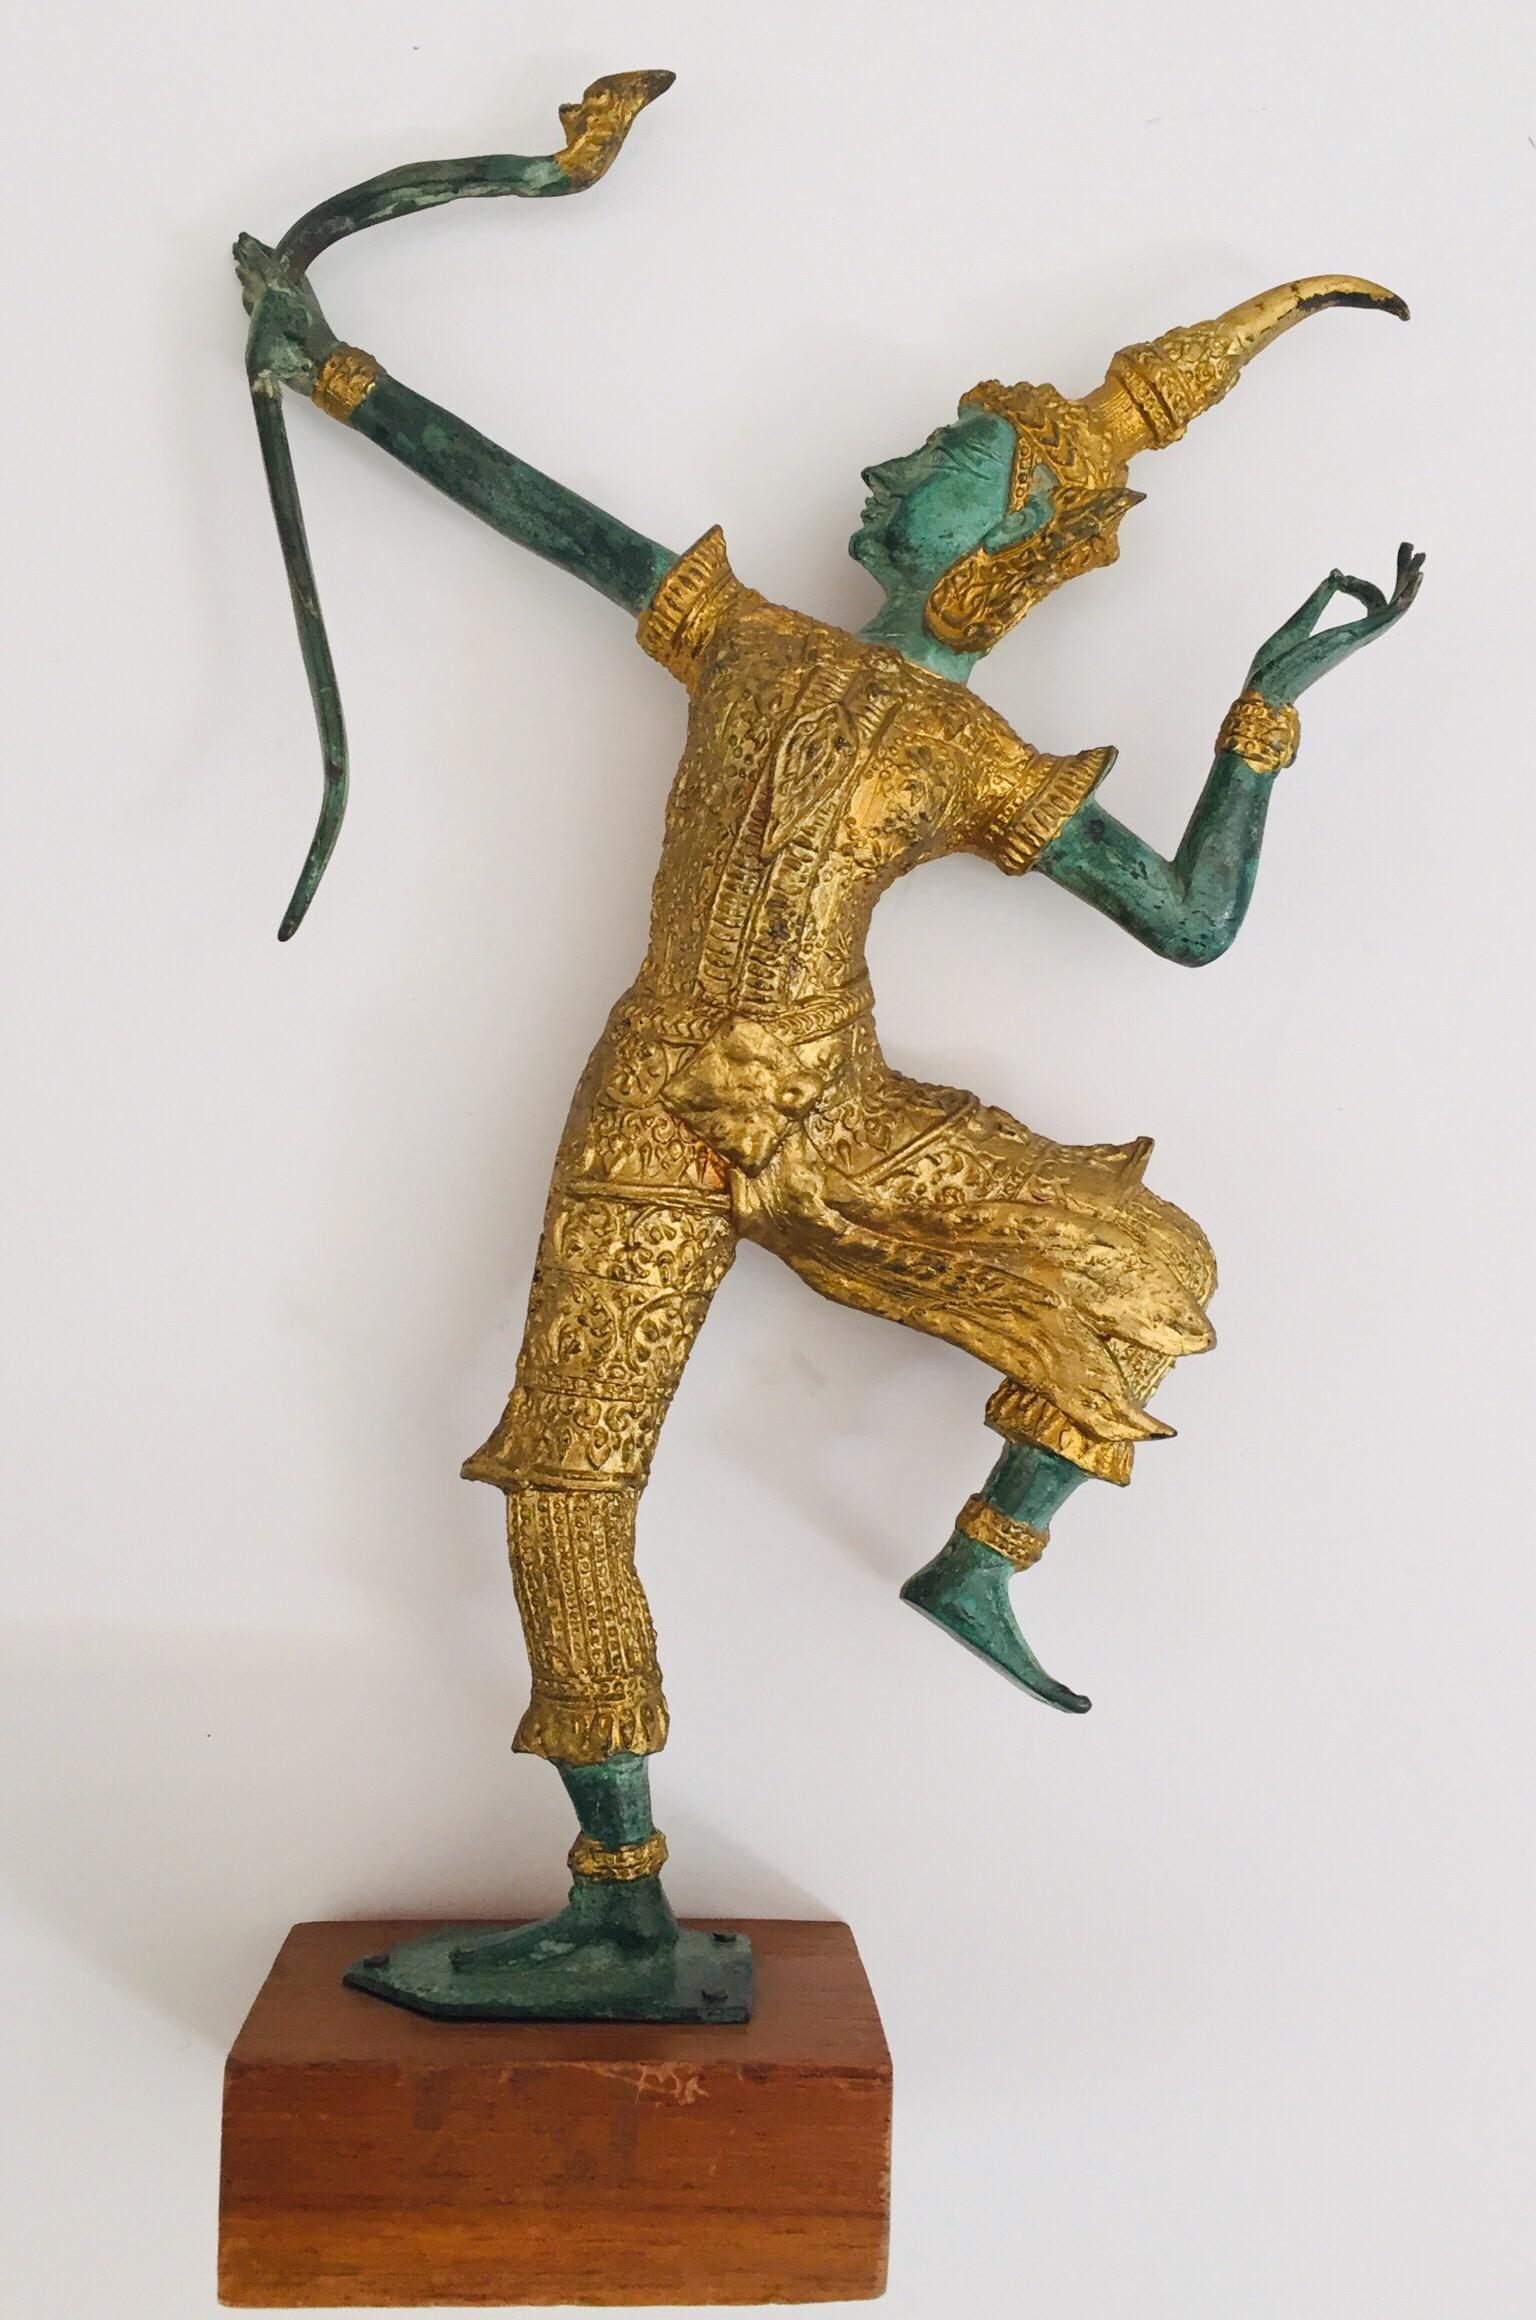 Vintage bronze statue in gold and green of Prince Rama shooting an arrow.
The Prince hero, Phra Rama (Rama), derived from Thailand’s national epic, Ramakien (Ramayana).
The figure is the distinguishing features of Khon, Thai classical drama.